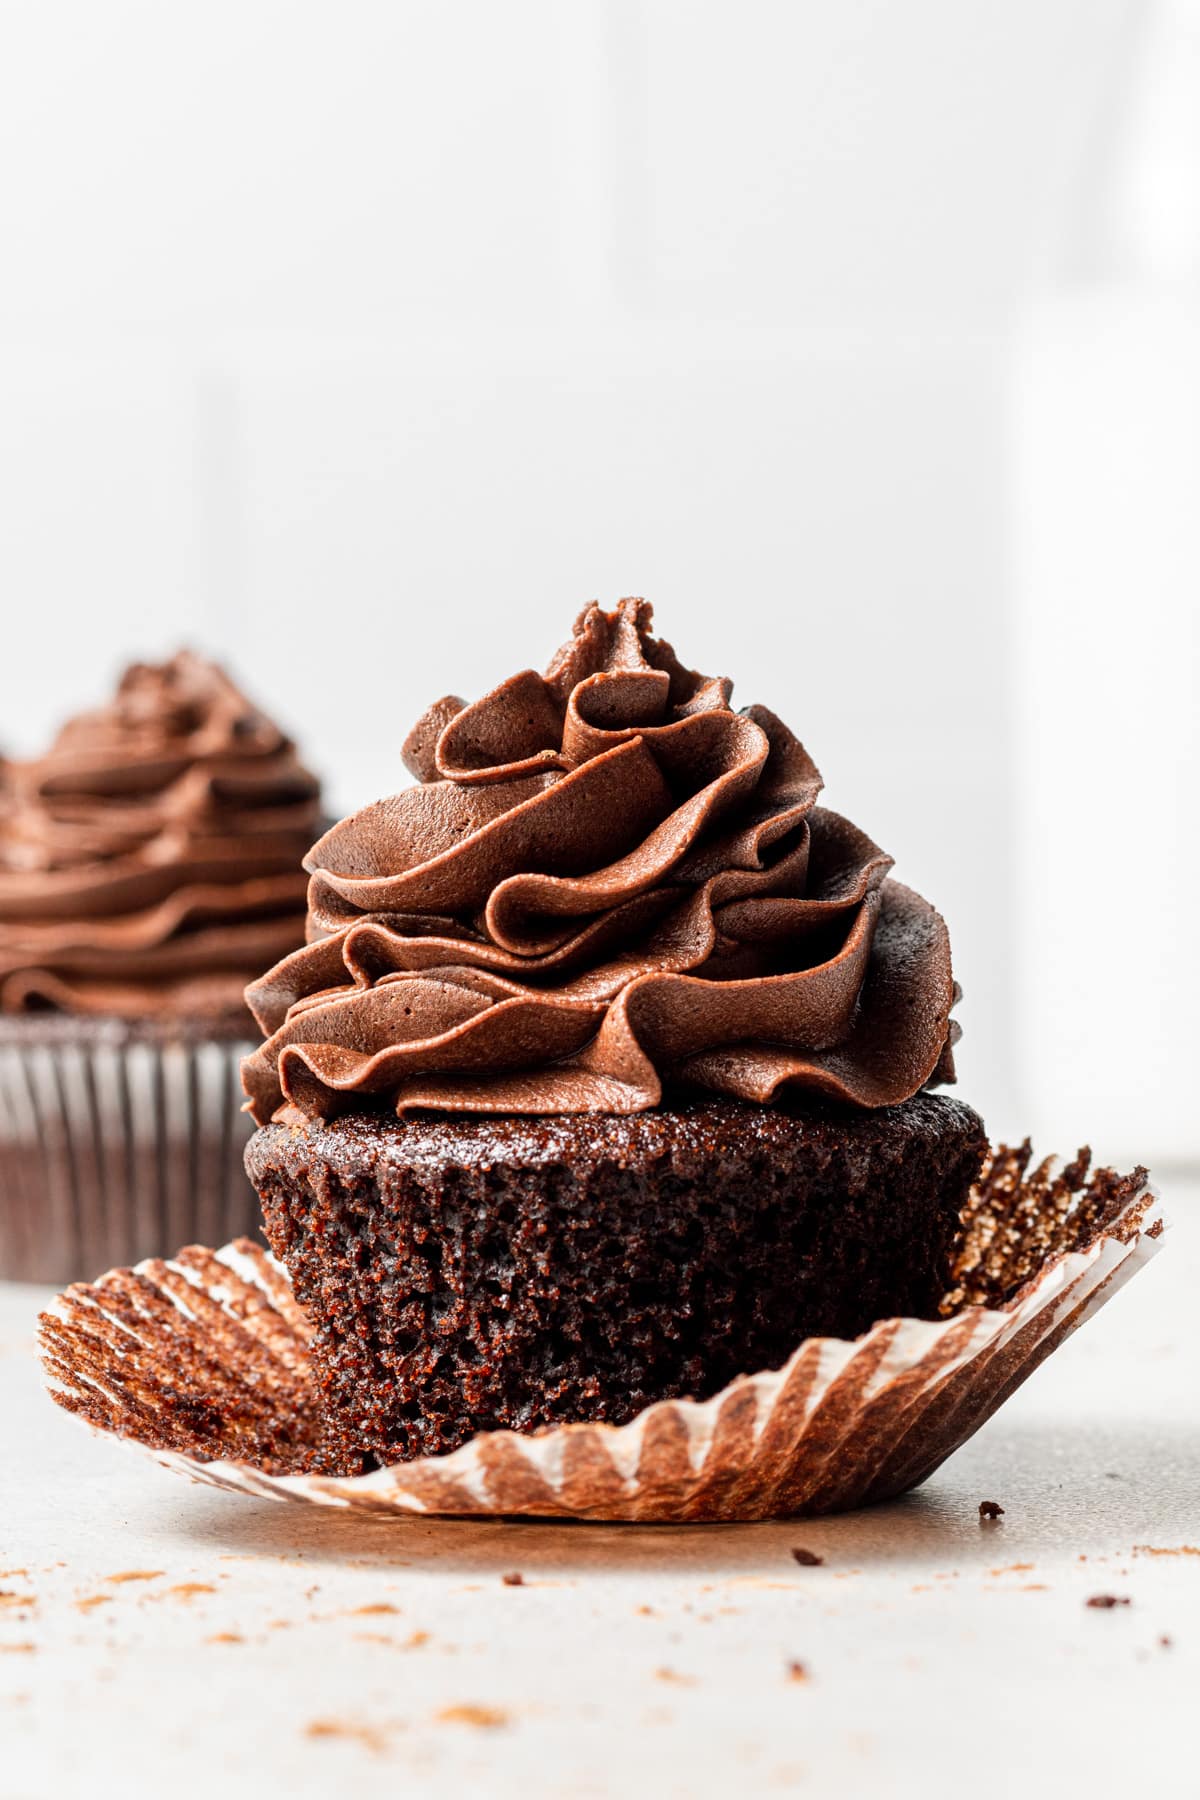 Eggless chocolate cupcake with cupcake liner open